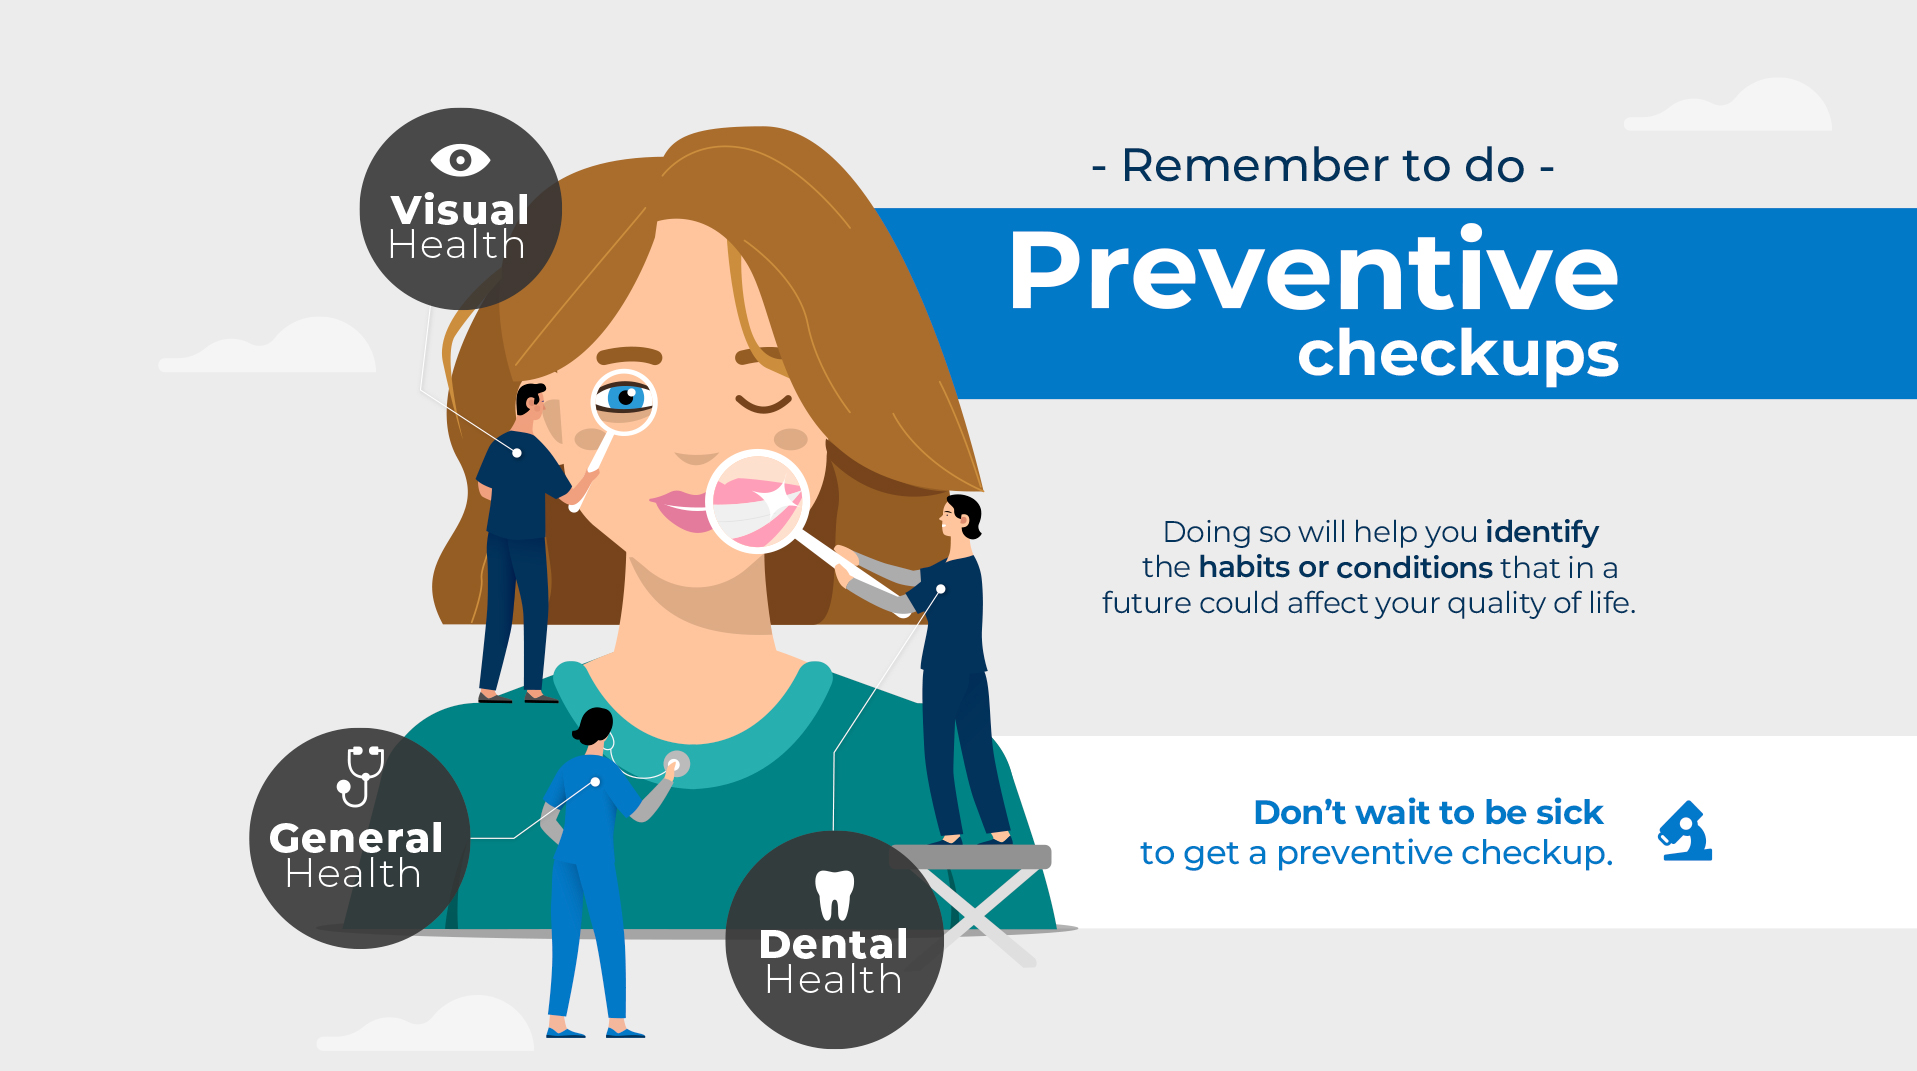 Remember to do Preventive checkups: visual health, general health and dental health. Doing so will hep you identify the habits or conditions that in a future could affect your quality of life.